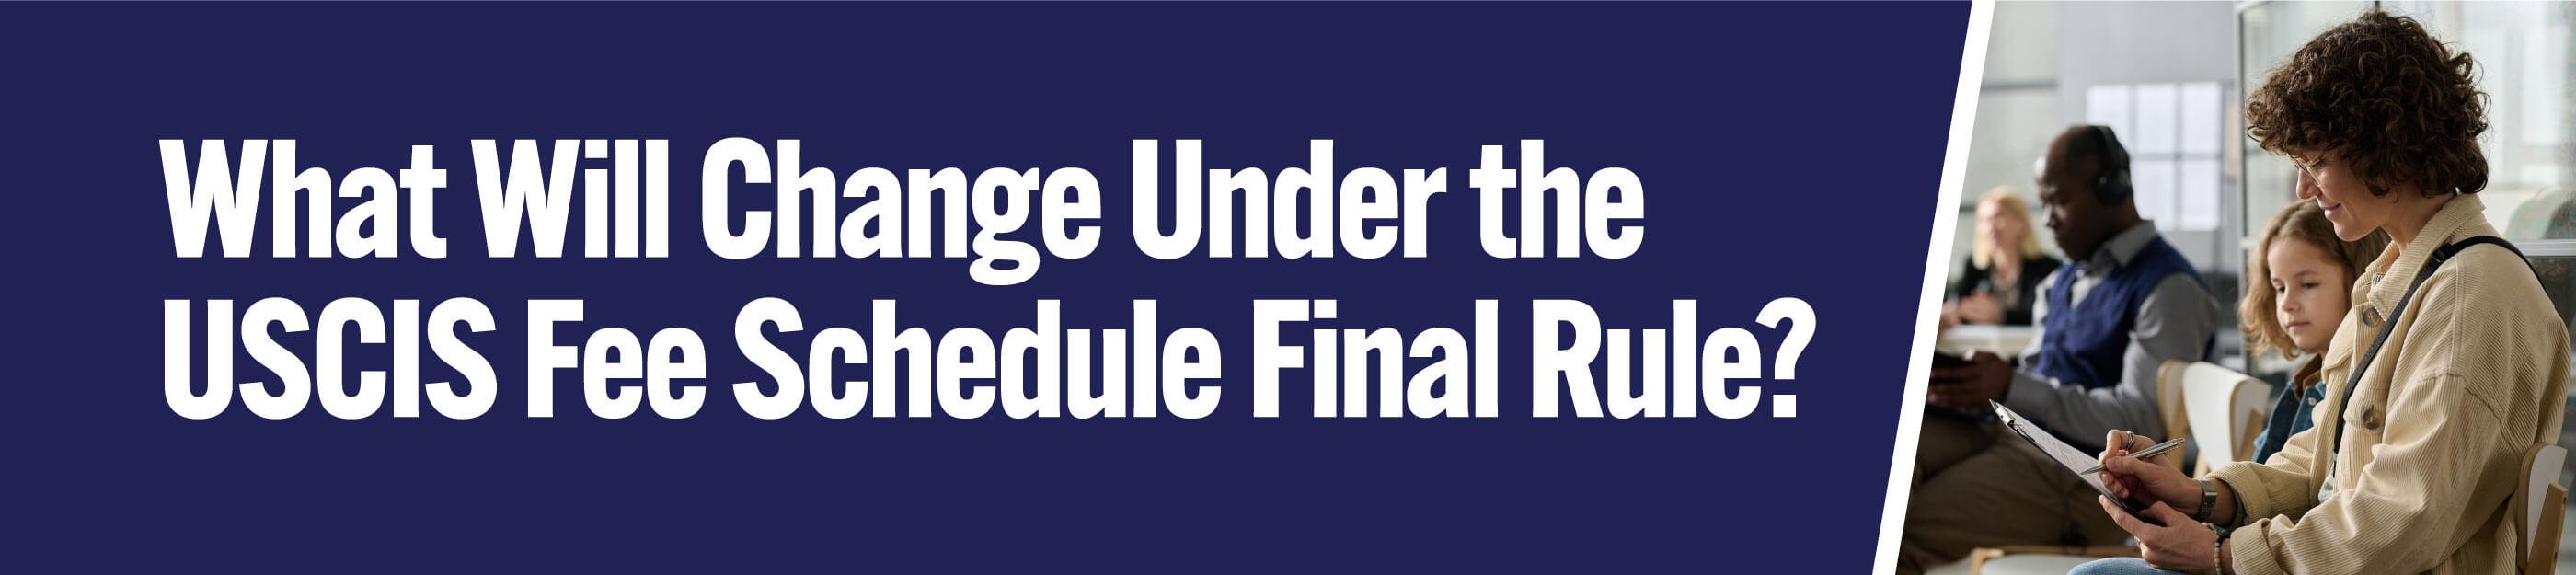 What Will Change Under the USCIS Fee Schedule Final Rule